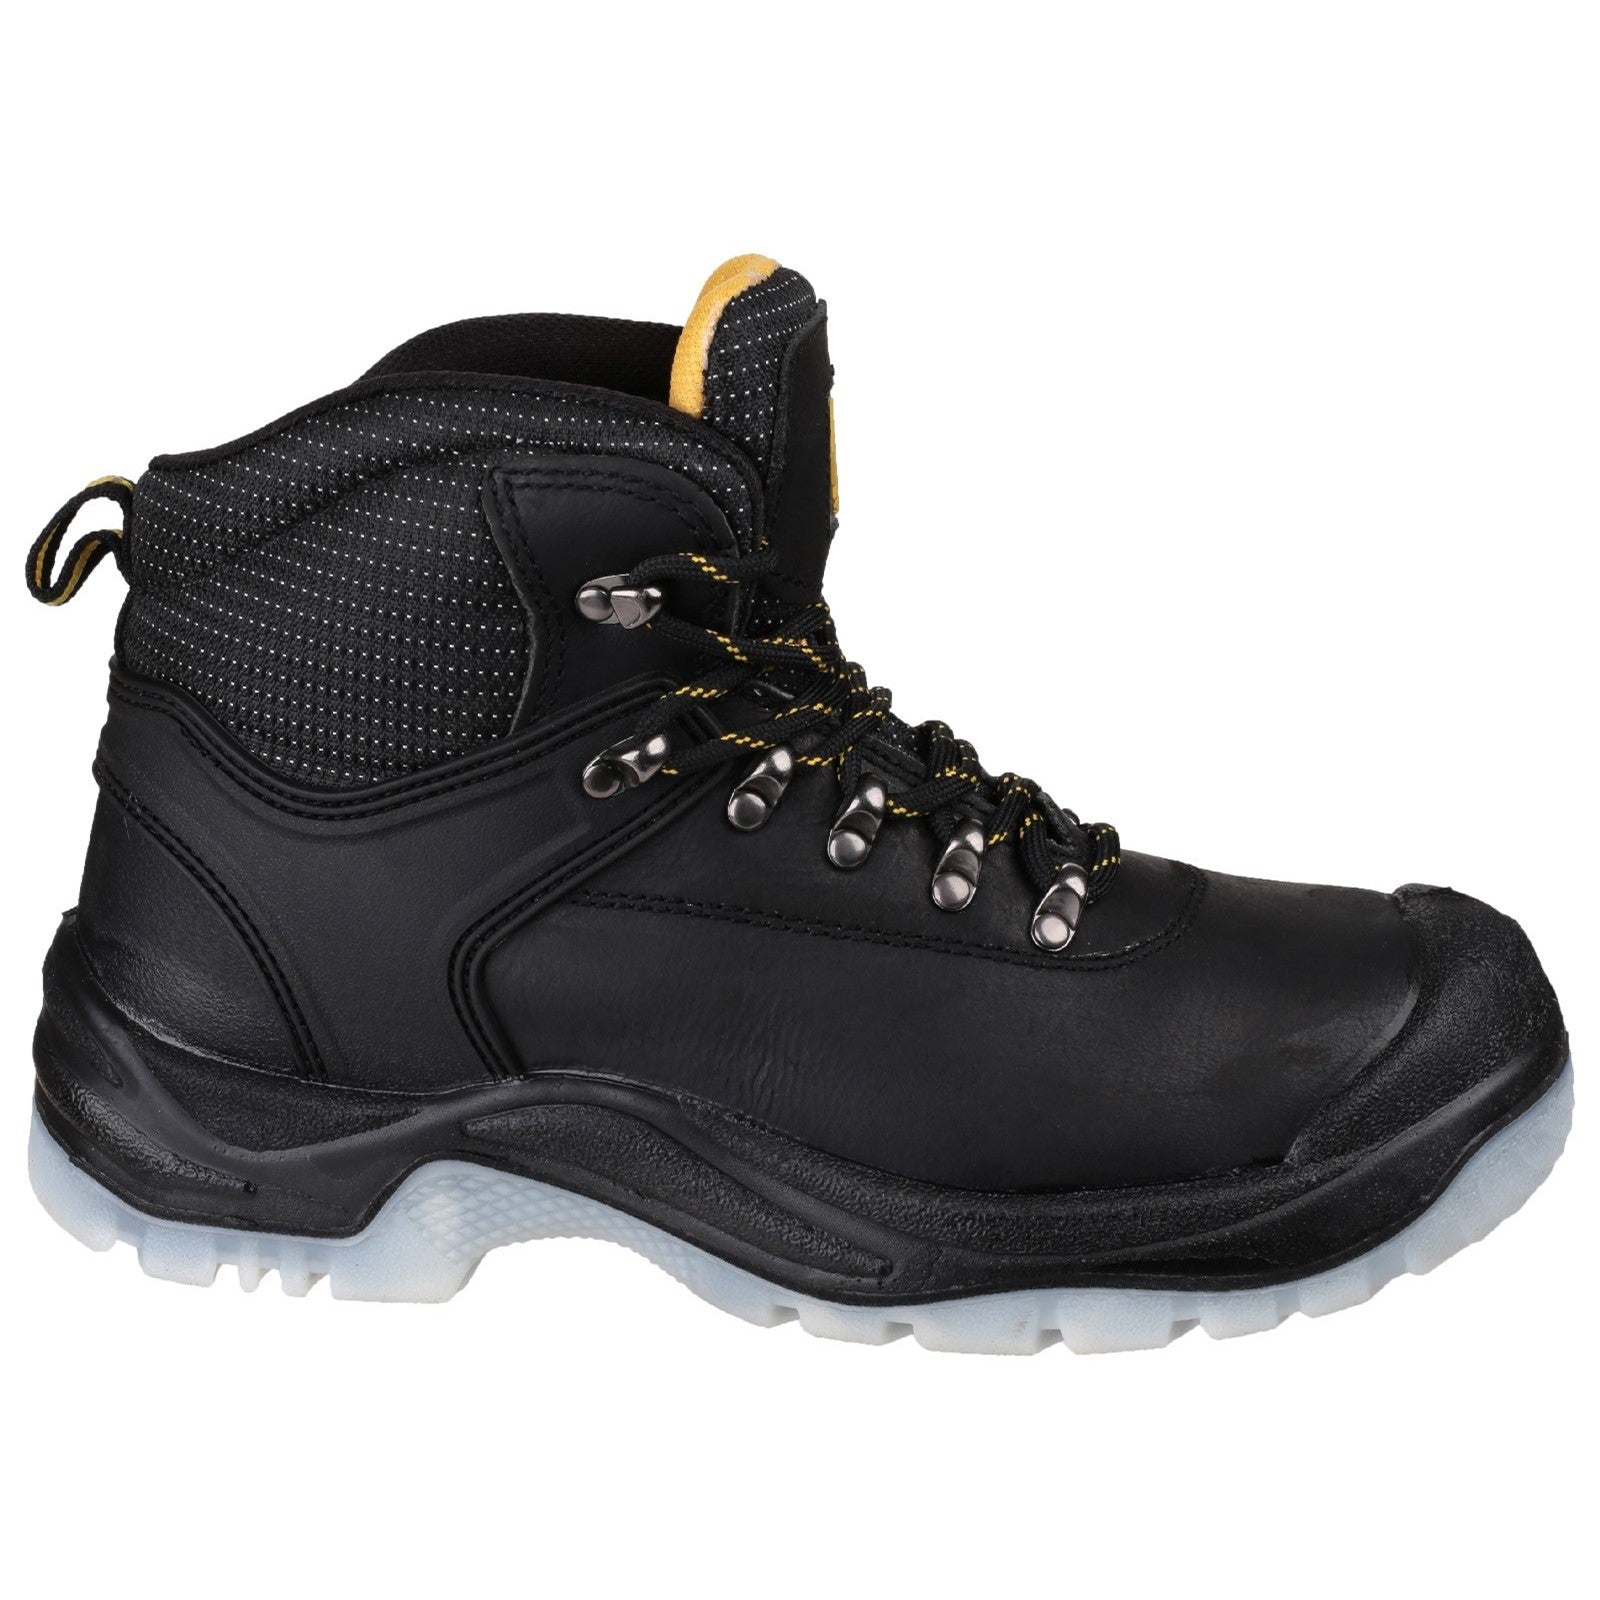 Amblers FS199 Hiker Safety Boot